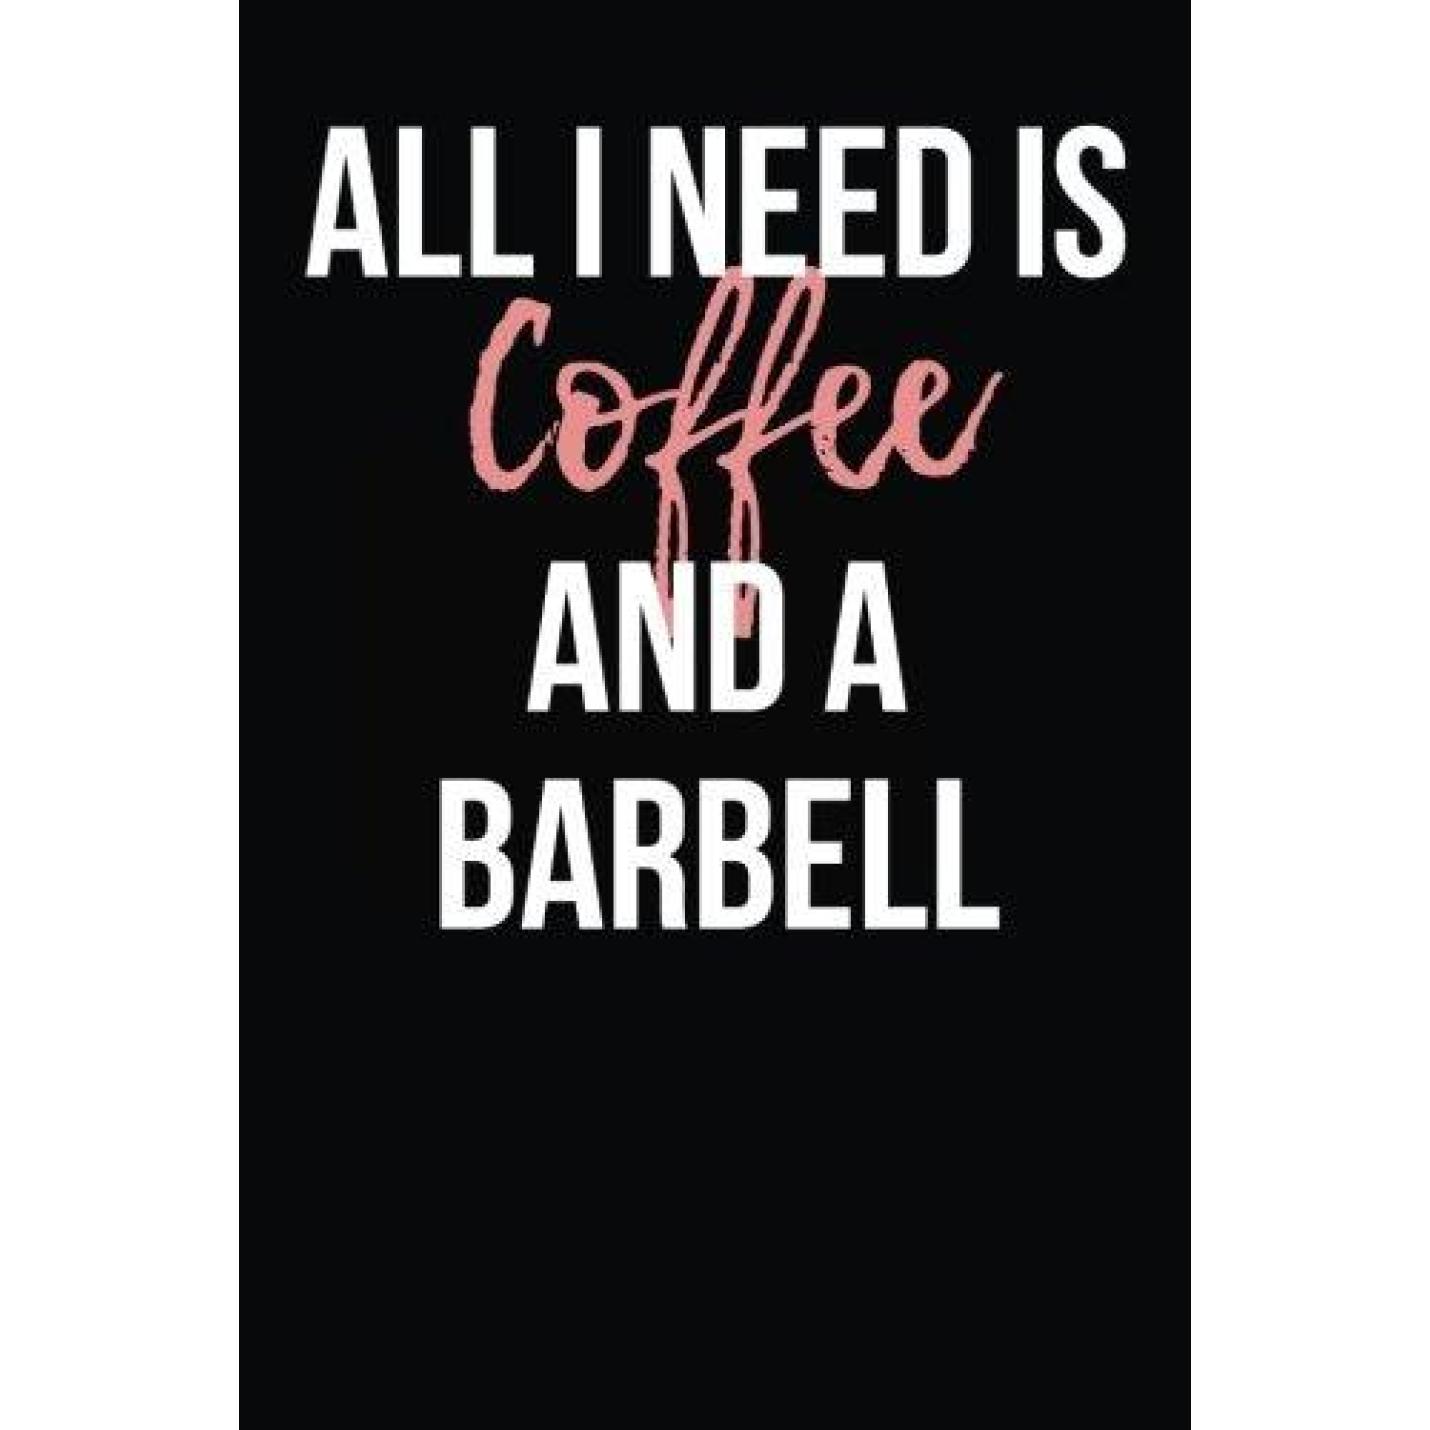 All I Need is Coffee and a Barbell: Blank Lined Journal Paperback